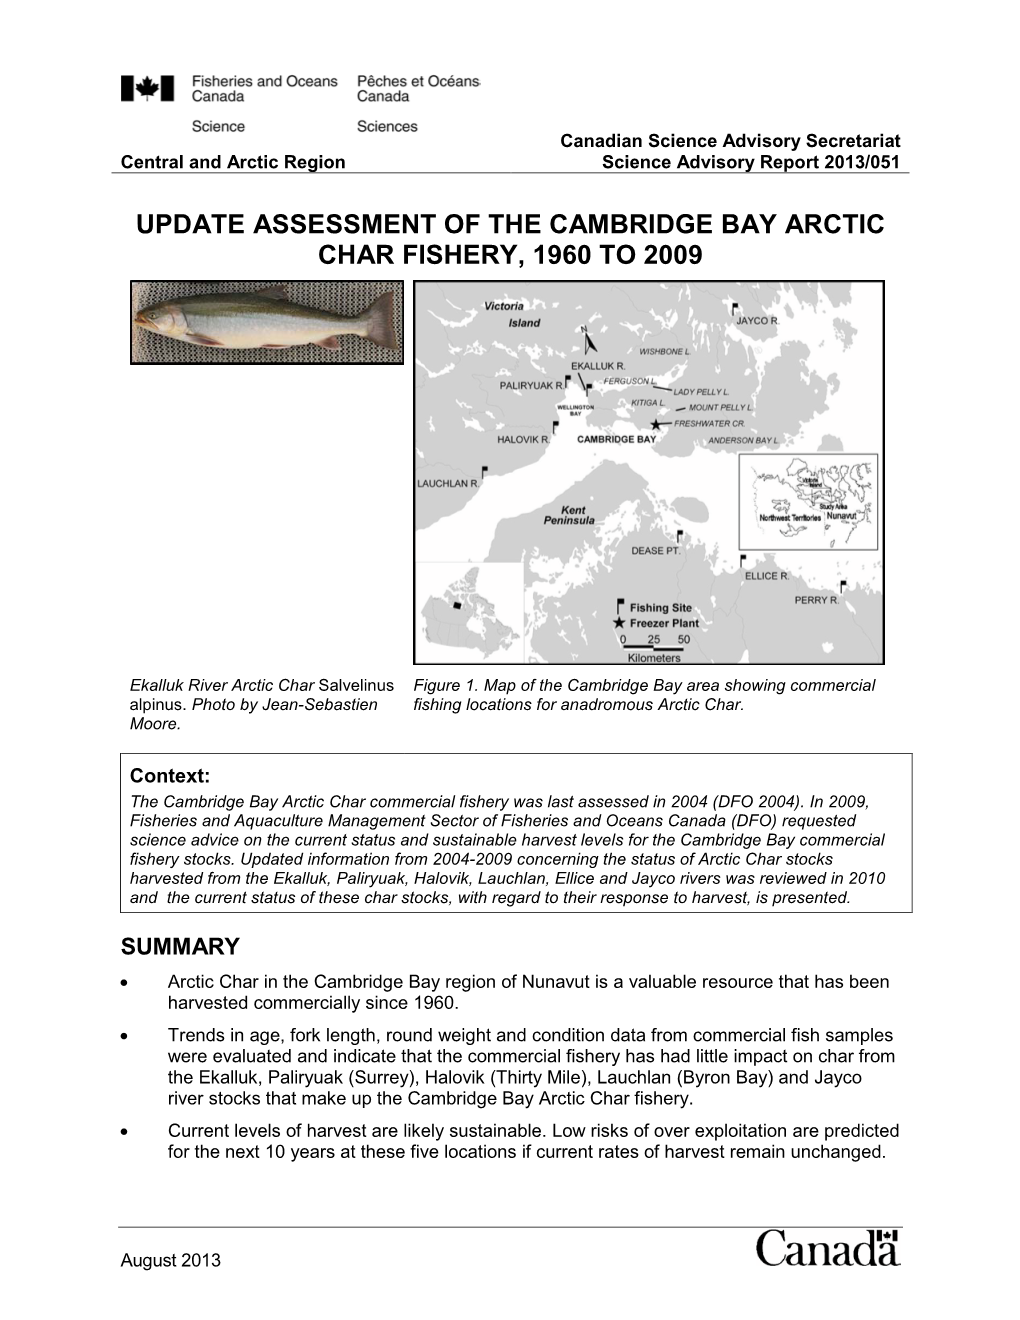 Update Assessment of the Cambridge Bay Arctic Char Fishery, 1960 to 2009